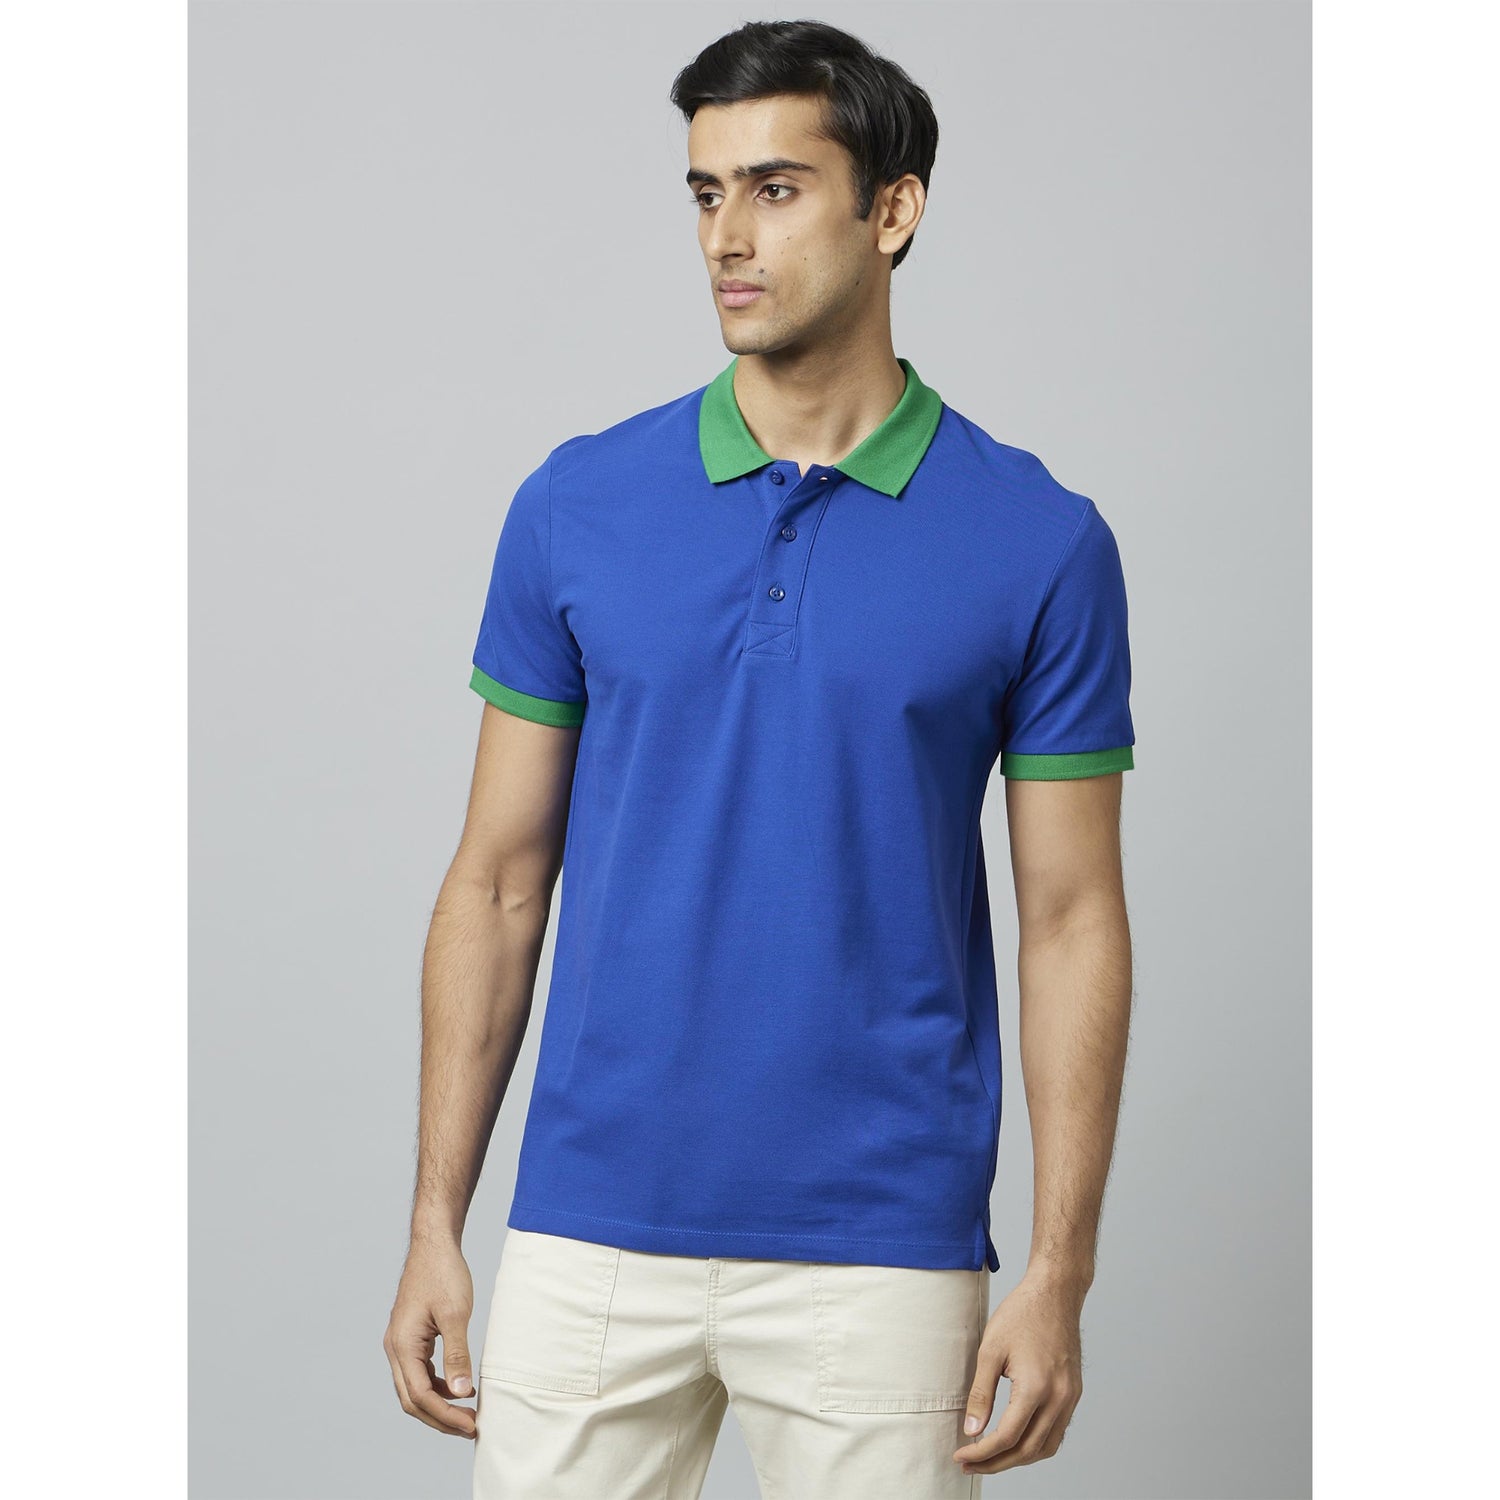 Blue Solid Short Sleeves Polo T-Shirt